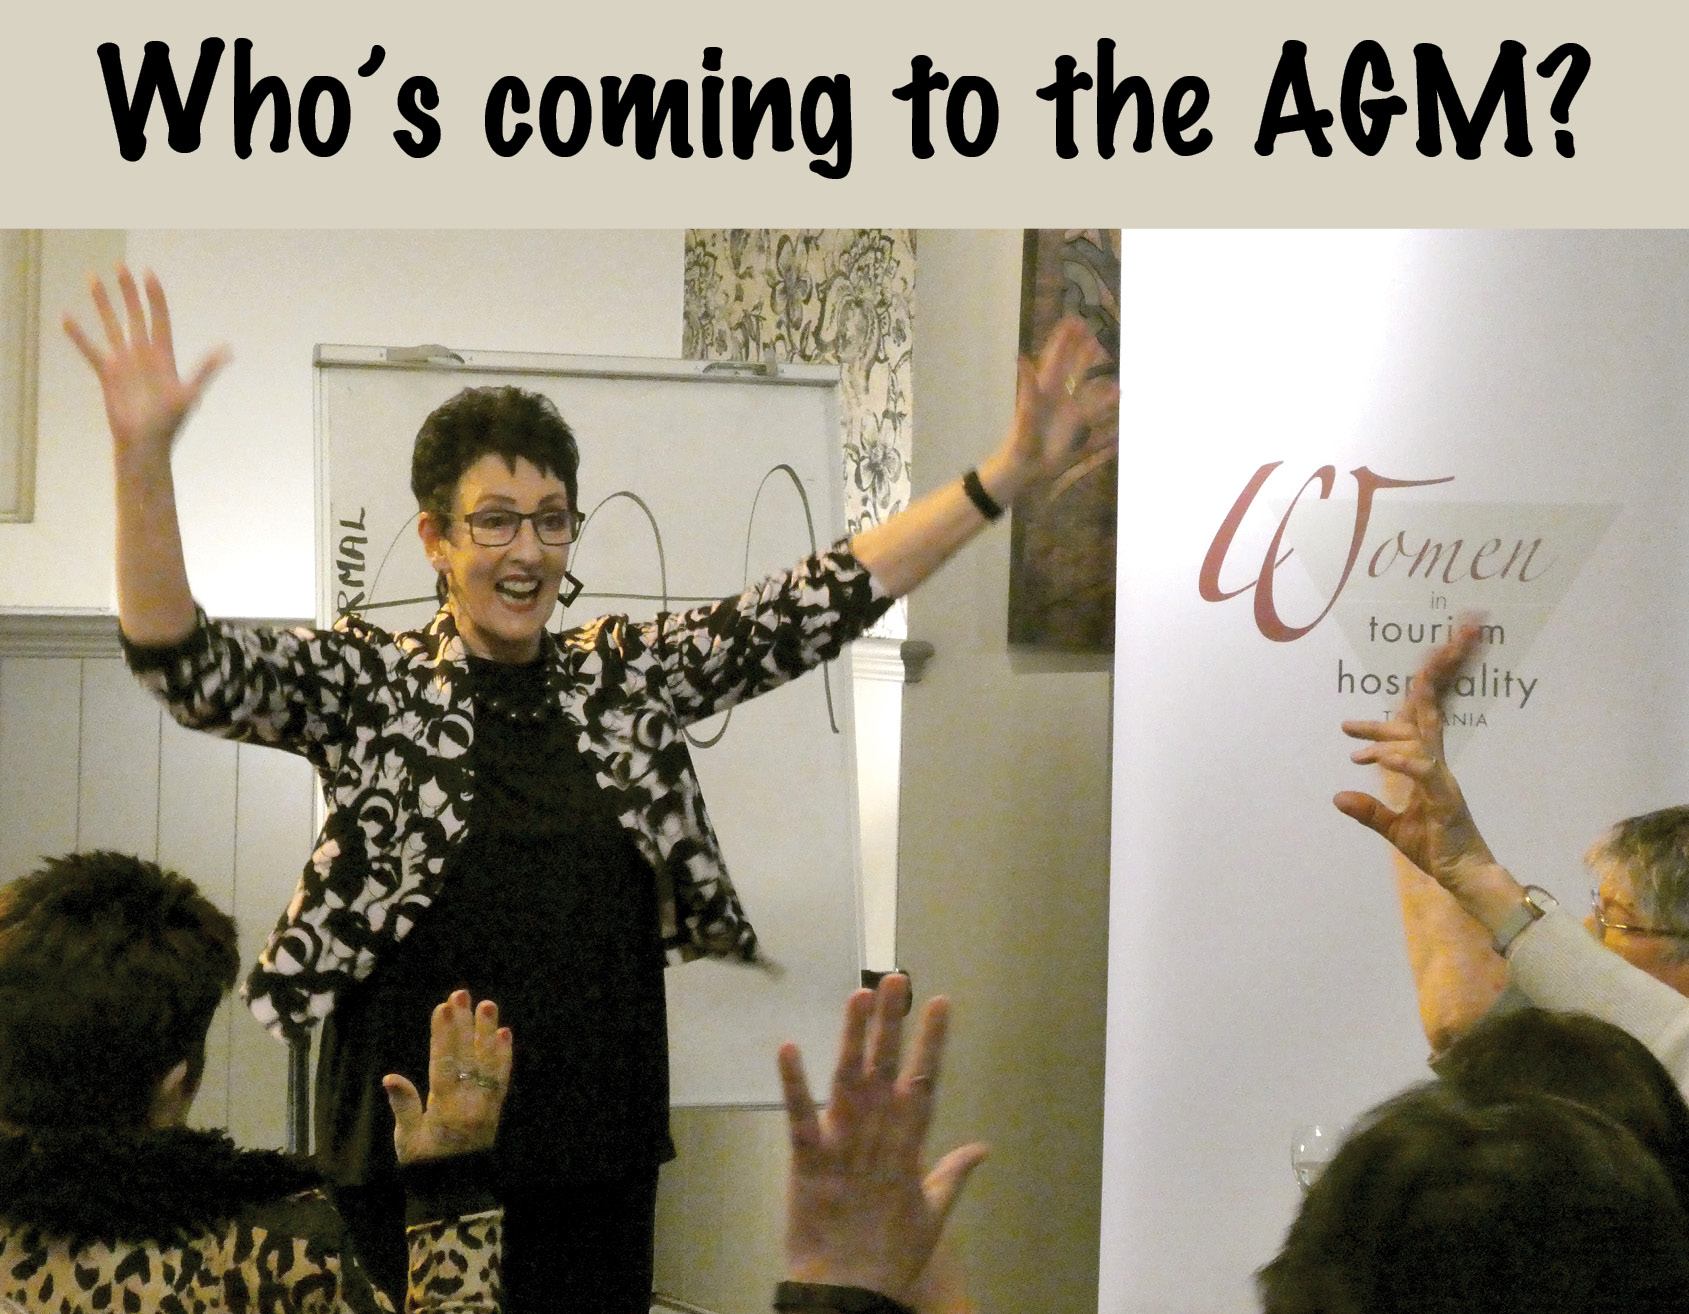 Invitation to AGM photo of Robyn Moore